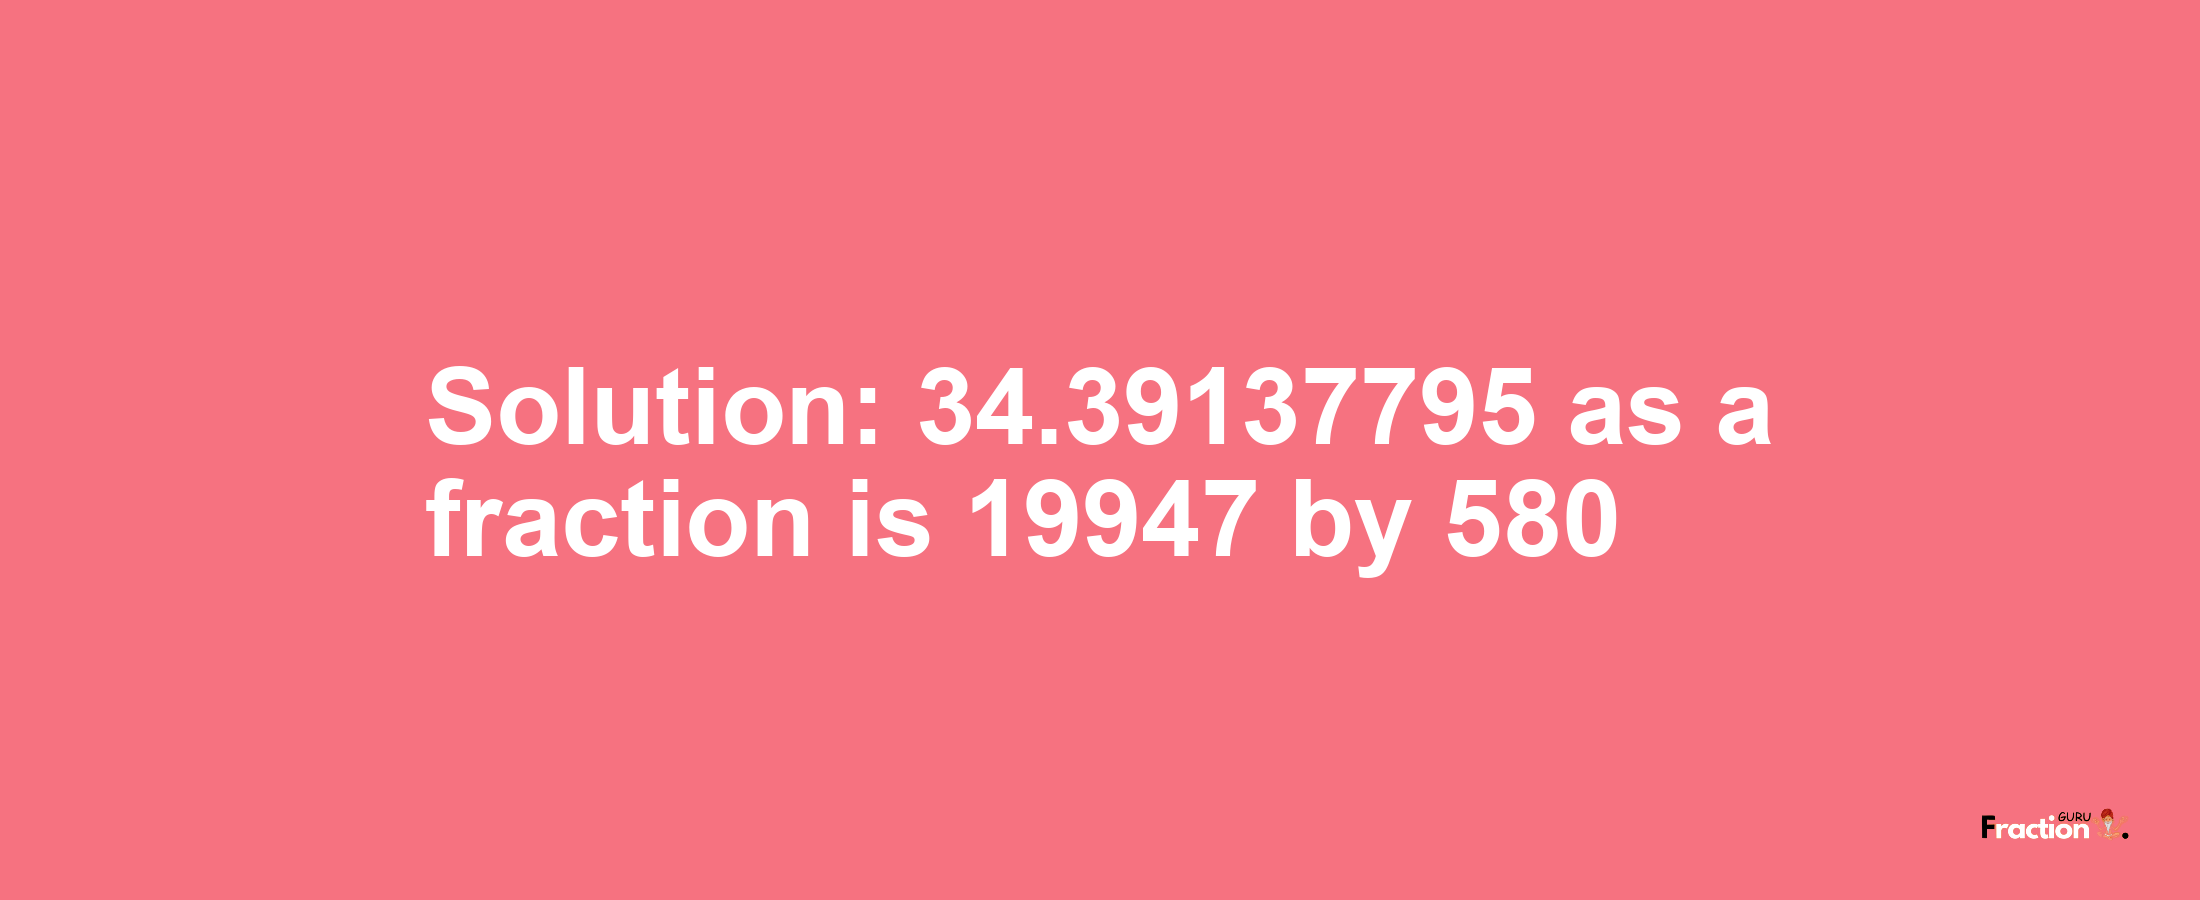 Solution:34.39137795 as a fraction is 19947/580